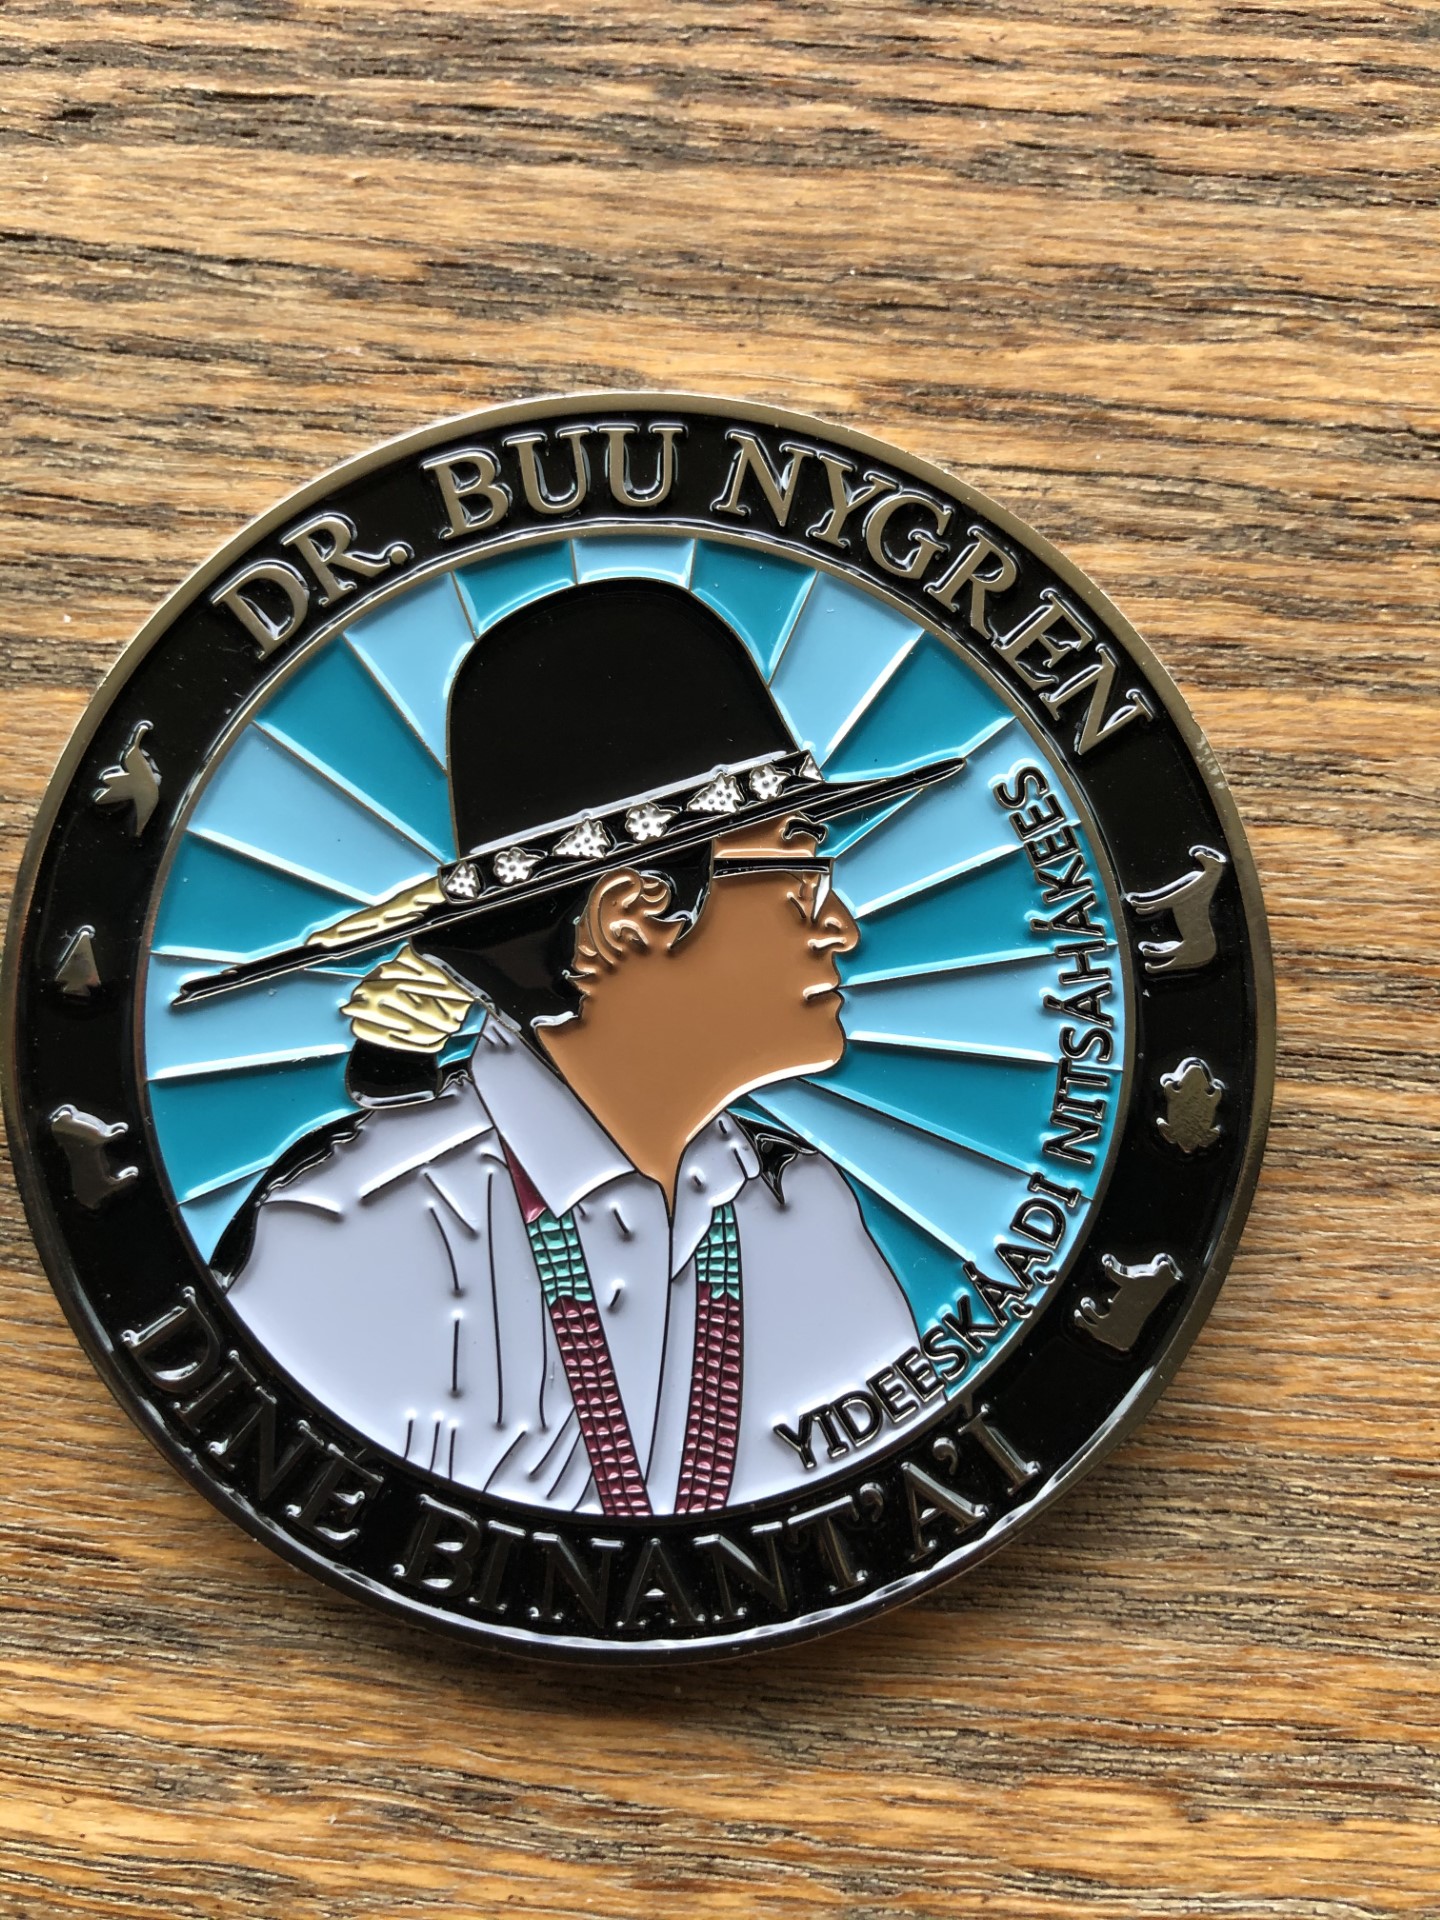 She re-connected with Navajo Nation President Bu Nygren who presented her with a specially minted presidential coin that is bestowed on dignitaries and friends of the Nation.